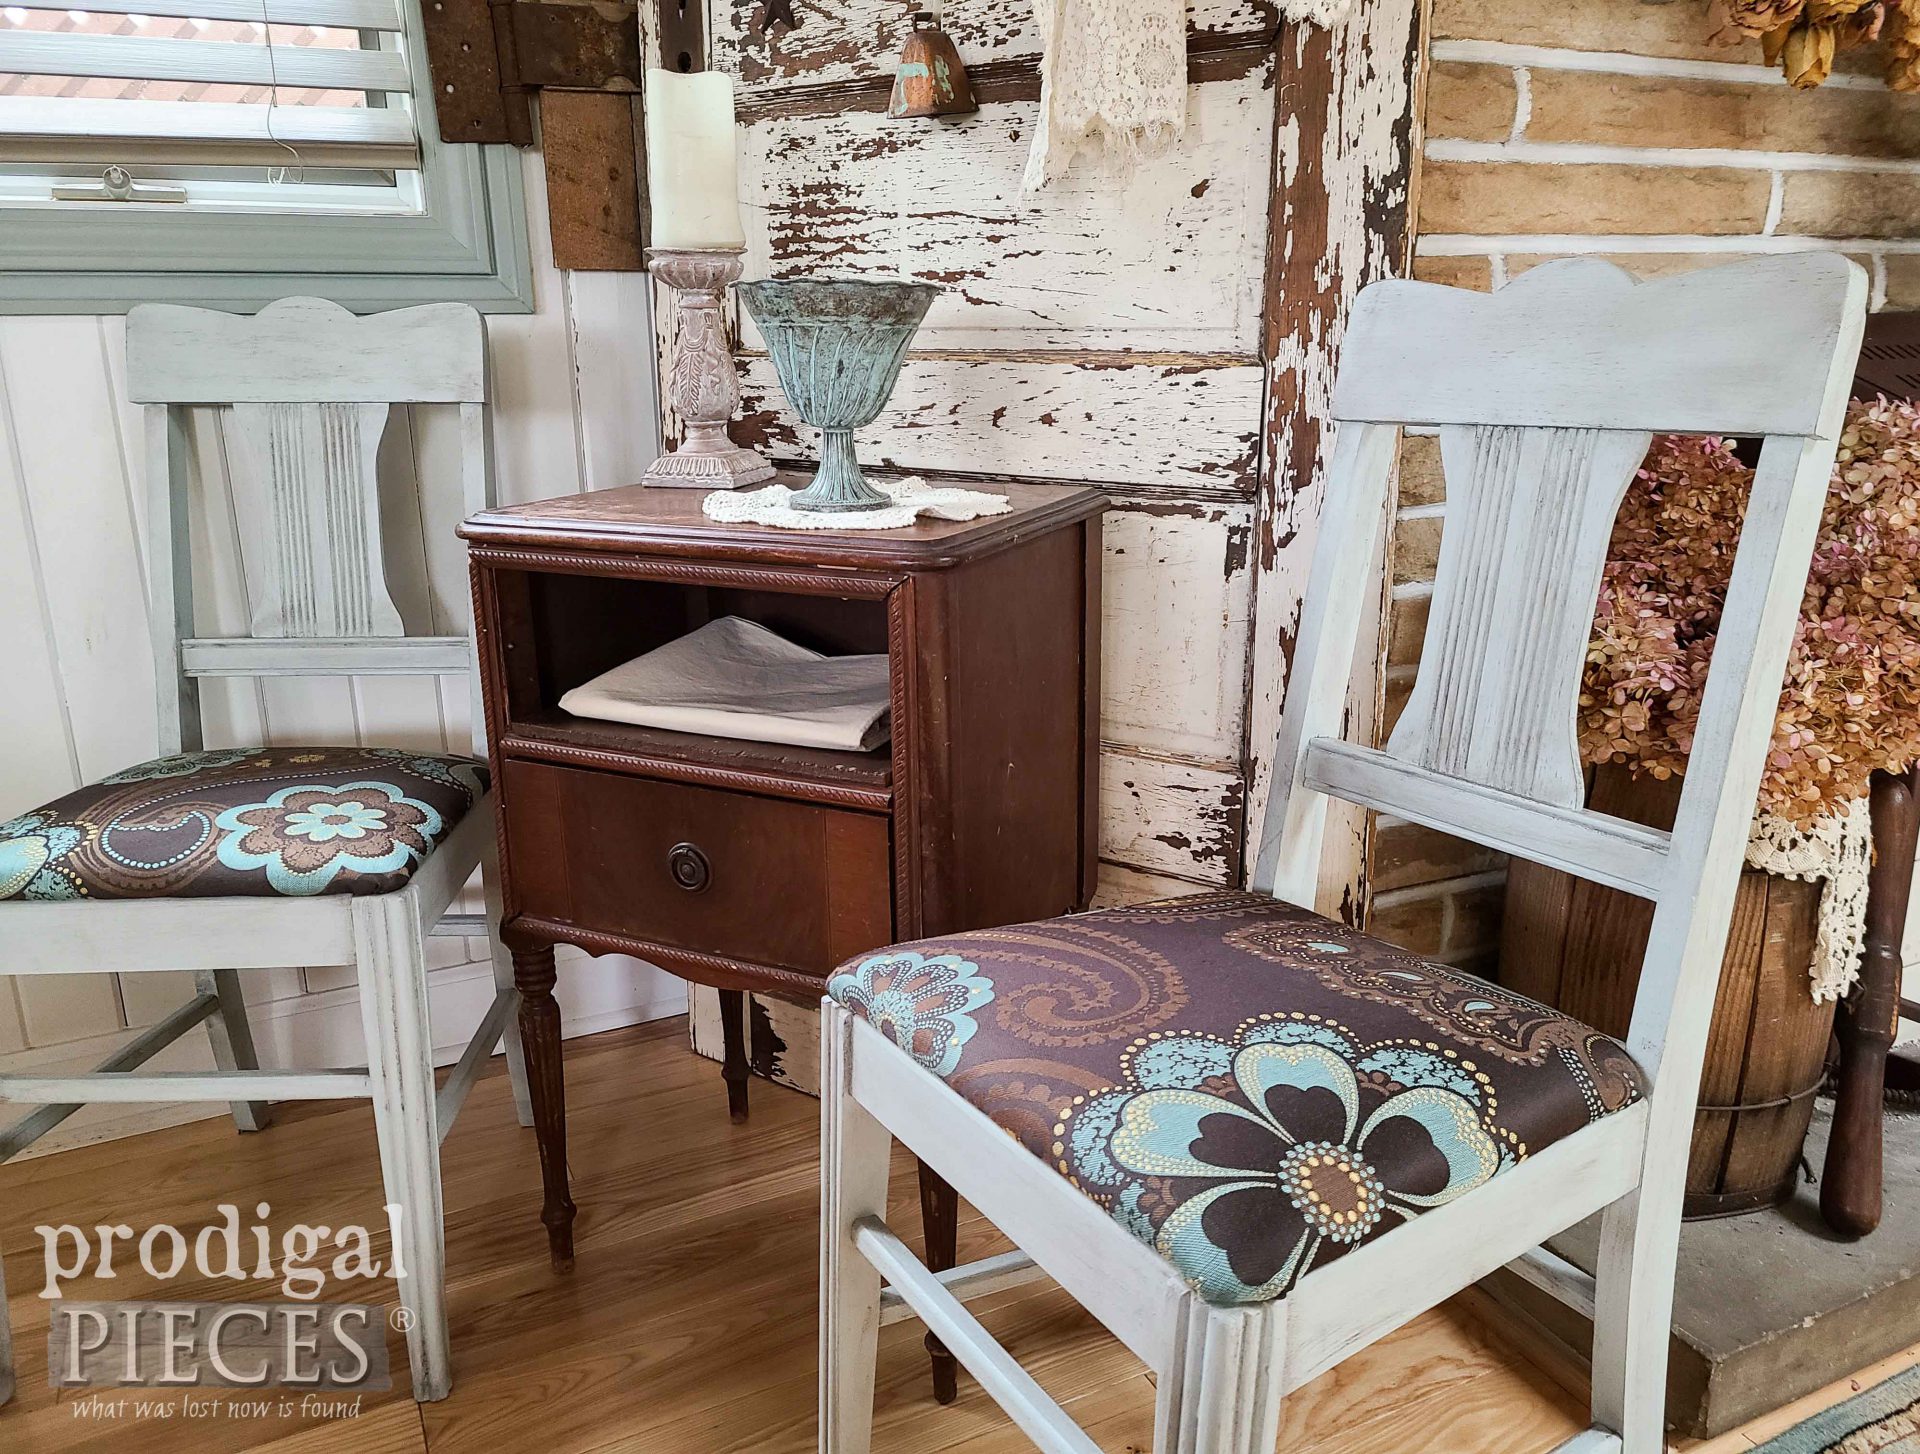 DIY Vintage Chairs with Paint & Upholstery Makeover by Larissa of Prodigal Pieces | prodigalpieces.com #prodigalpieces #furniture #upholstery #diy